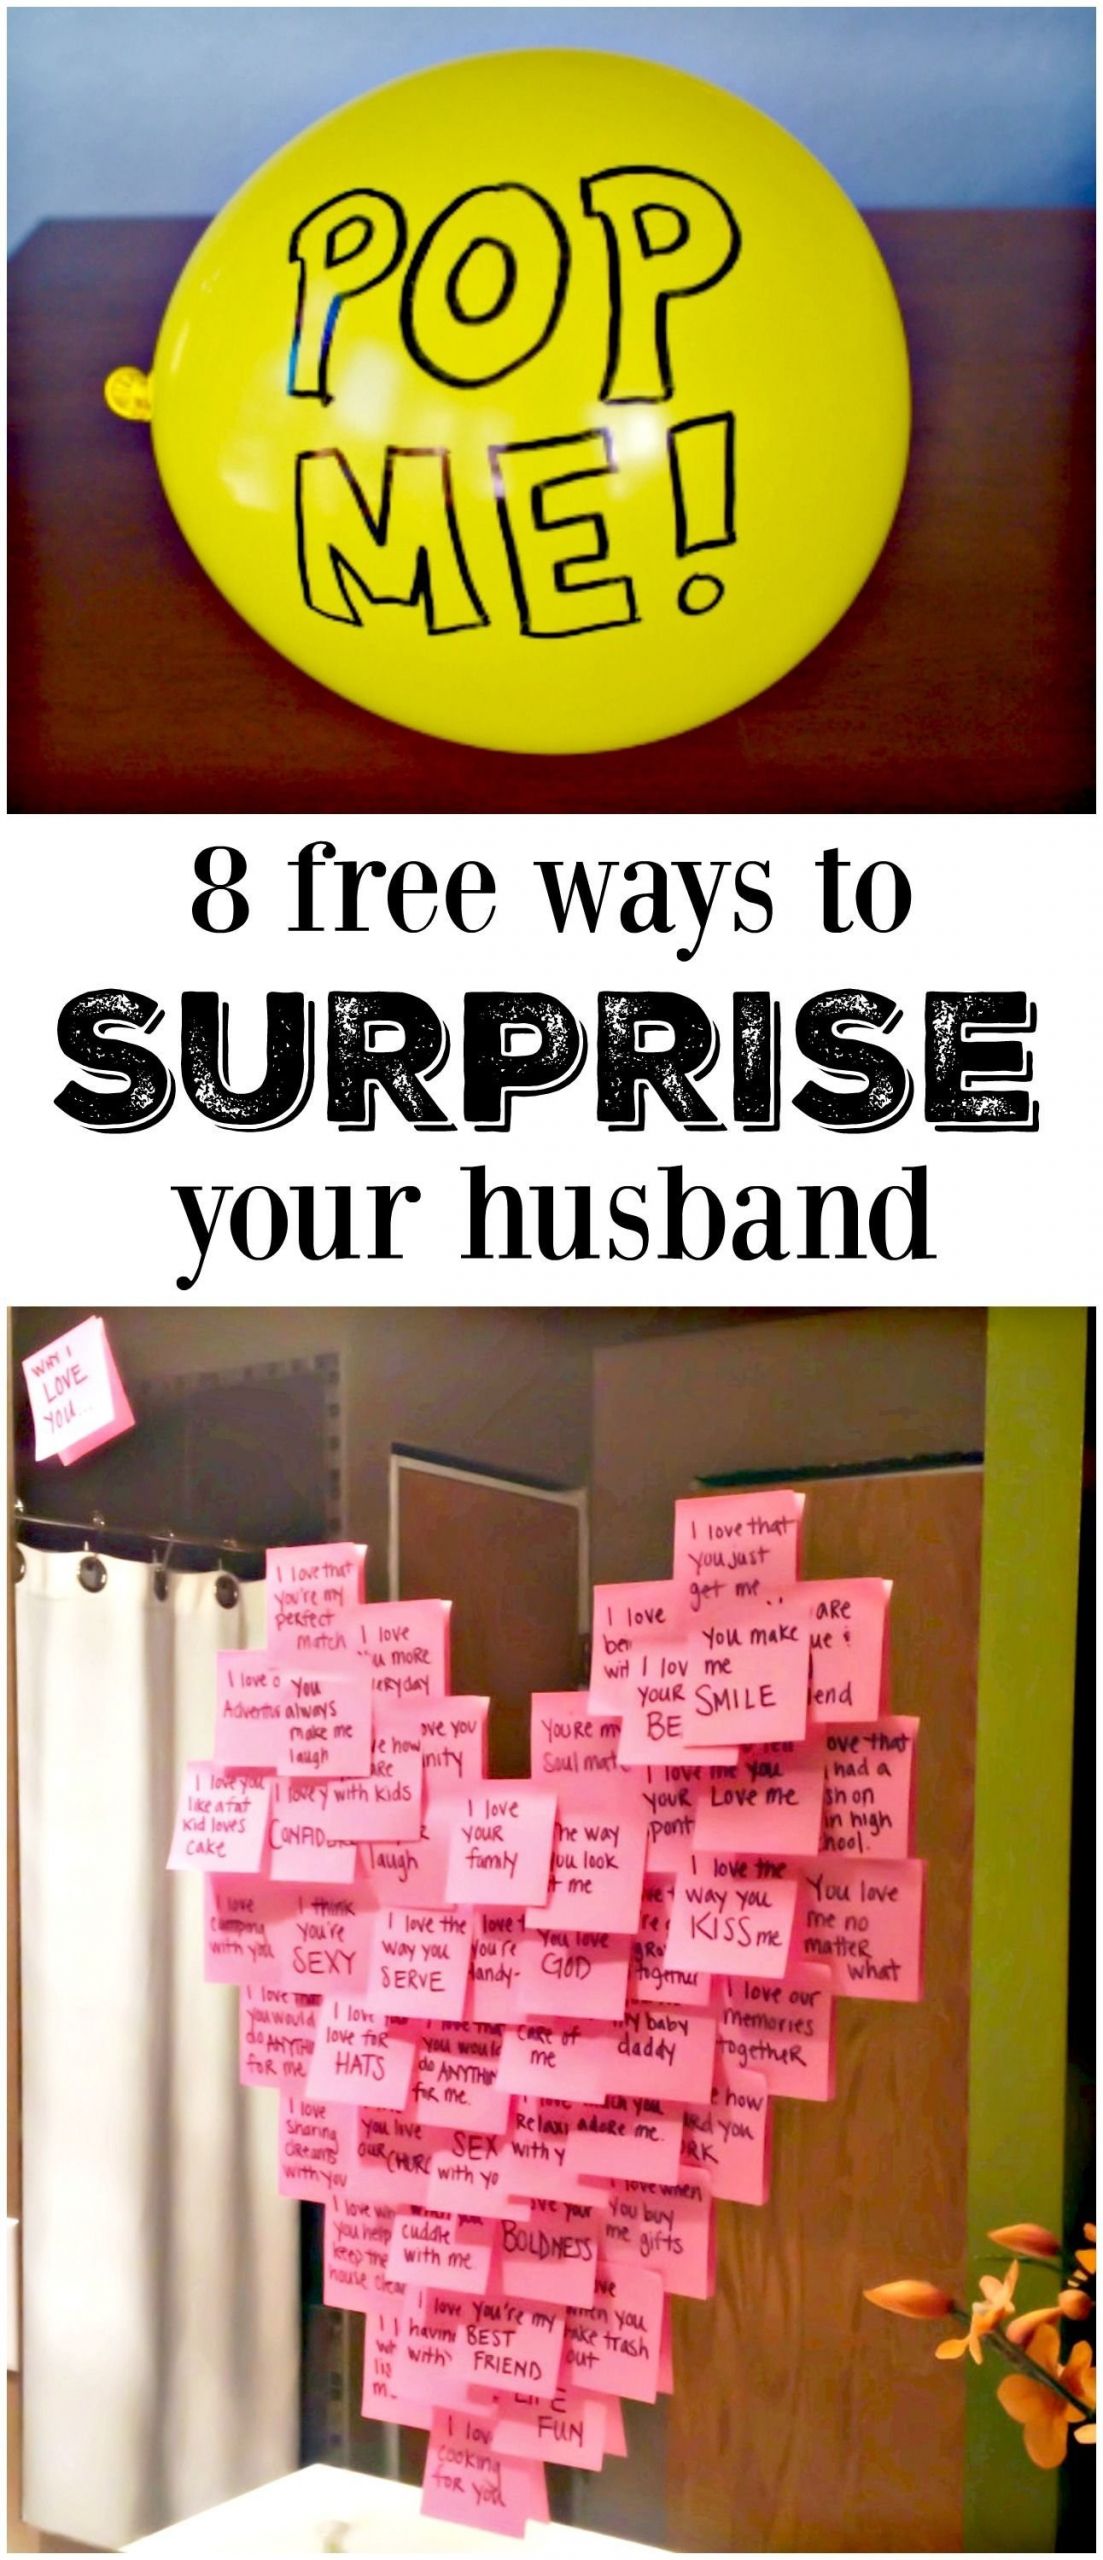 Gift Ideas For Husbands Birthday
 10 Amazing Creative Birthday Ideas For Husband 2019